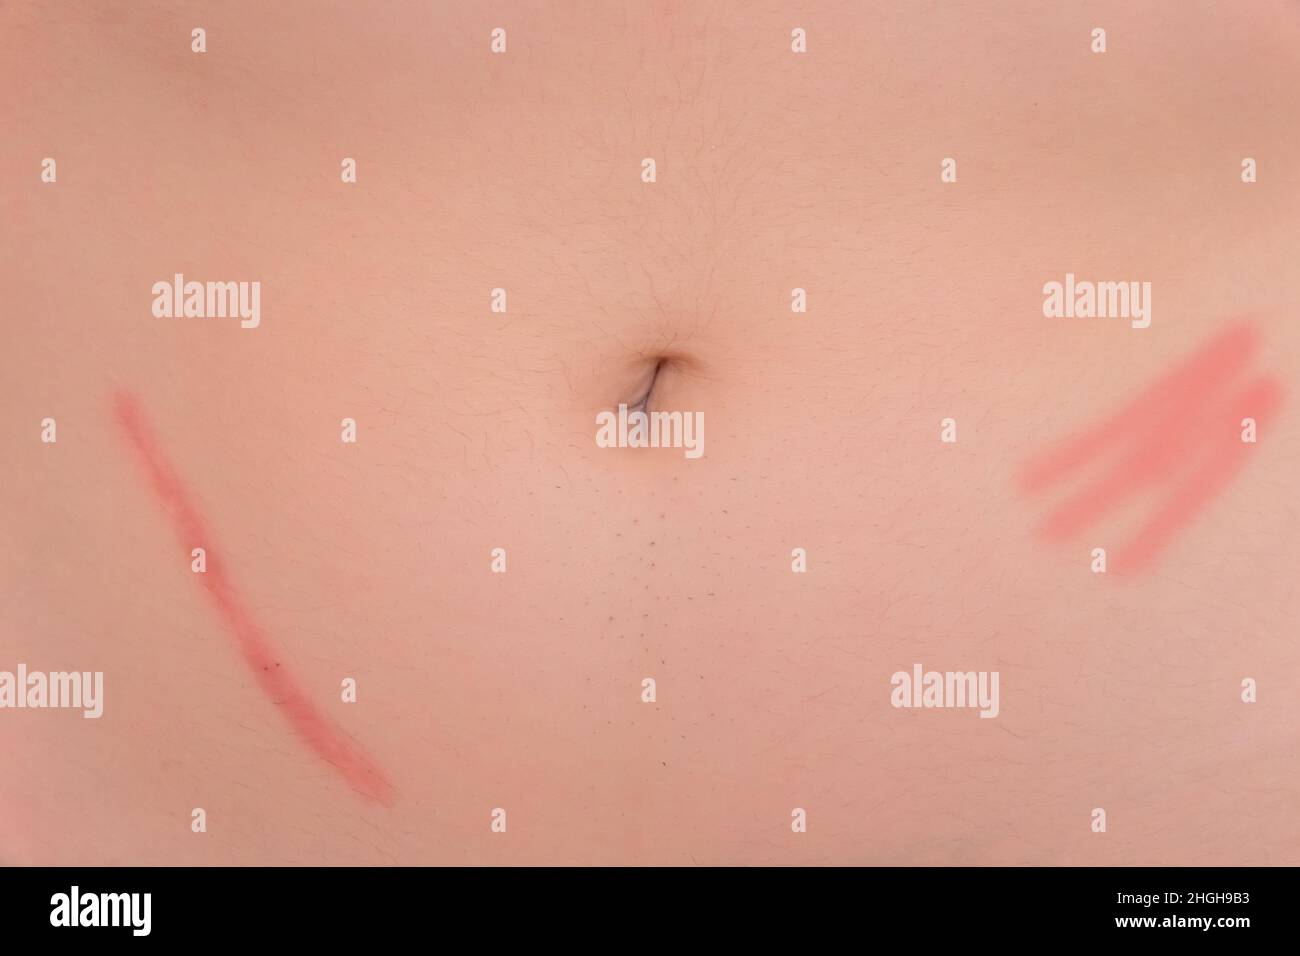 Body abdomen skin scar after removal of appendicitis surgery consequences of surgery, close-up. Stock Photo